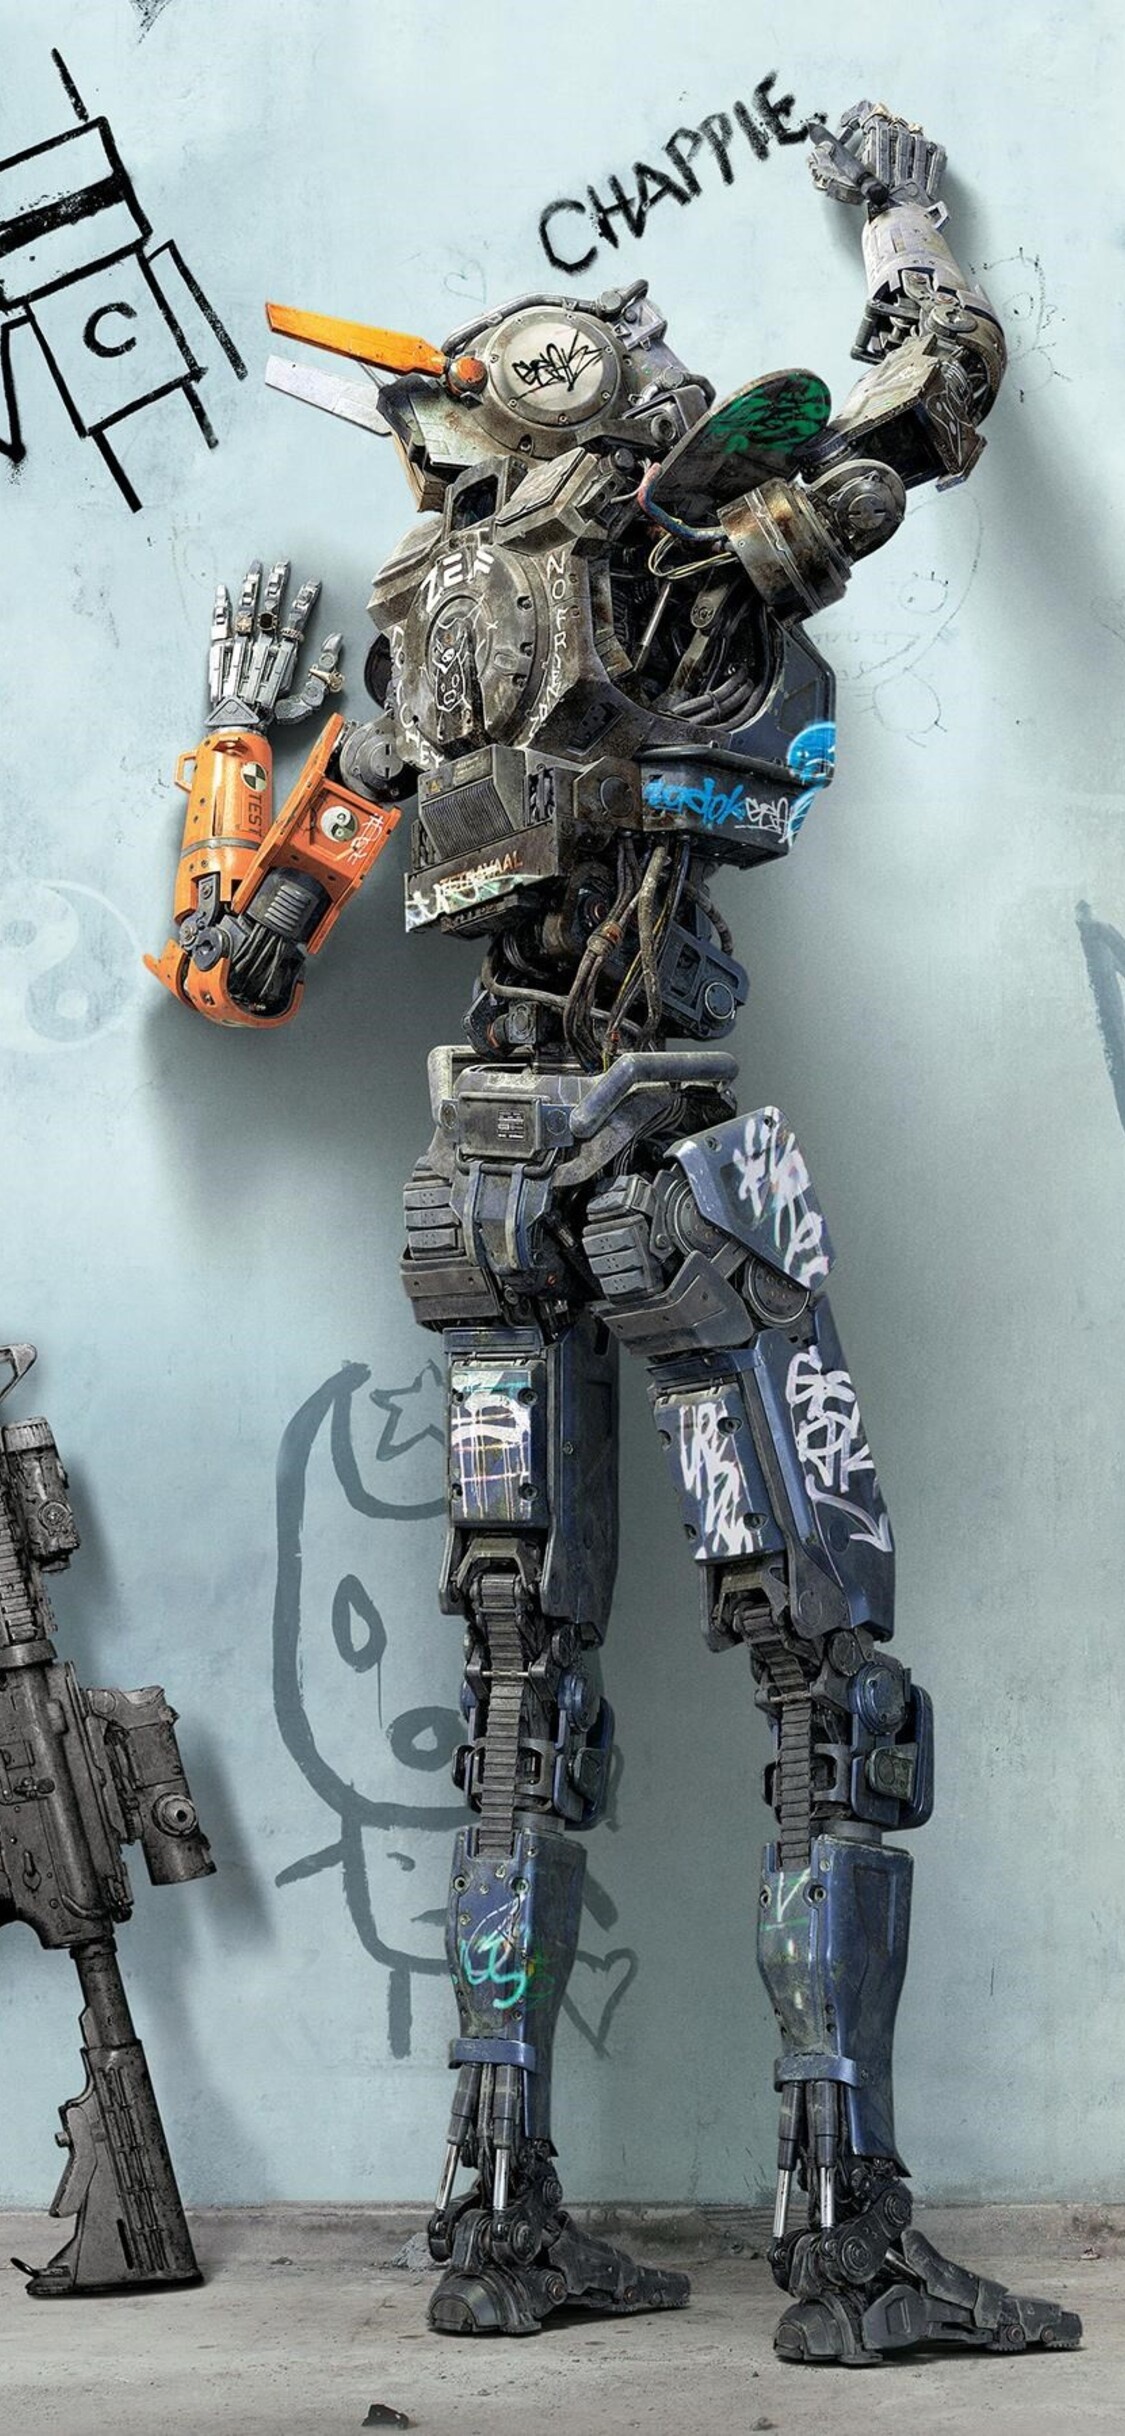 Chappie: A futuristic world patrolled by a robotic police force. 1130x2440 HD Wallpaper.